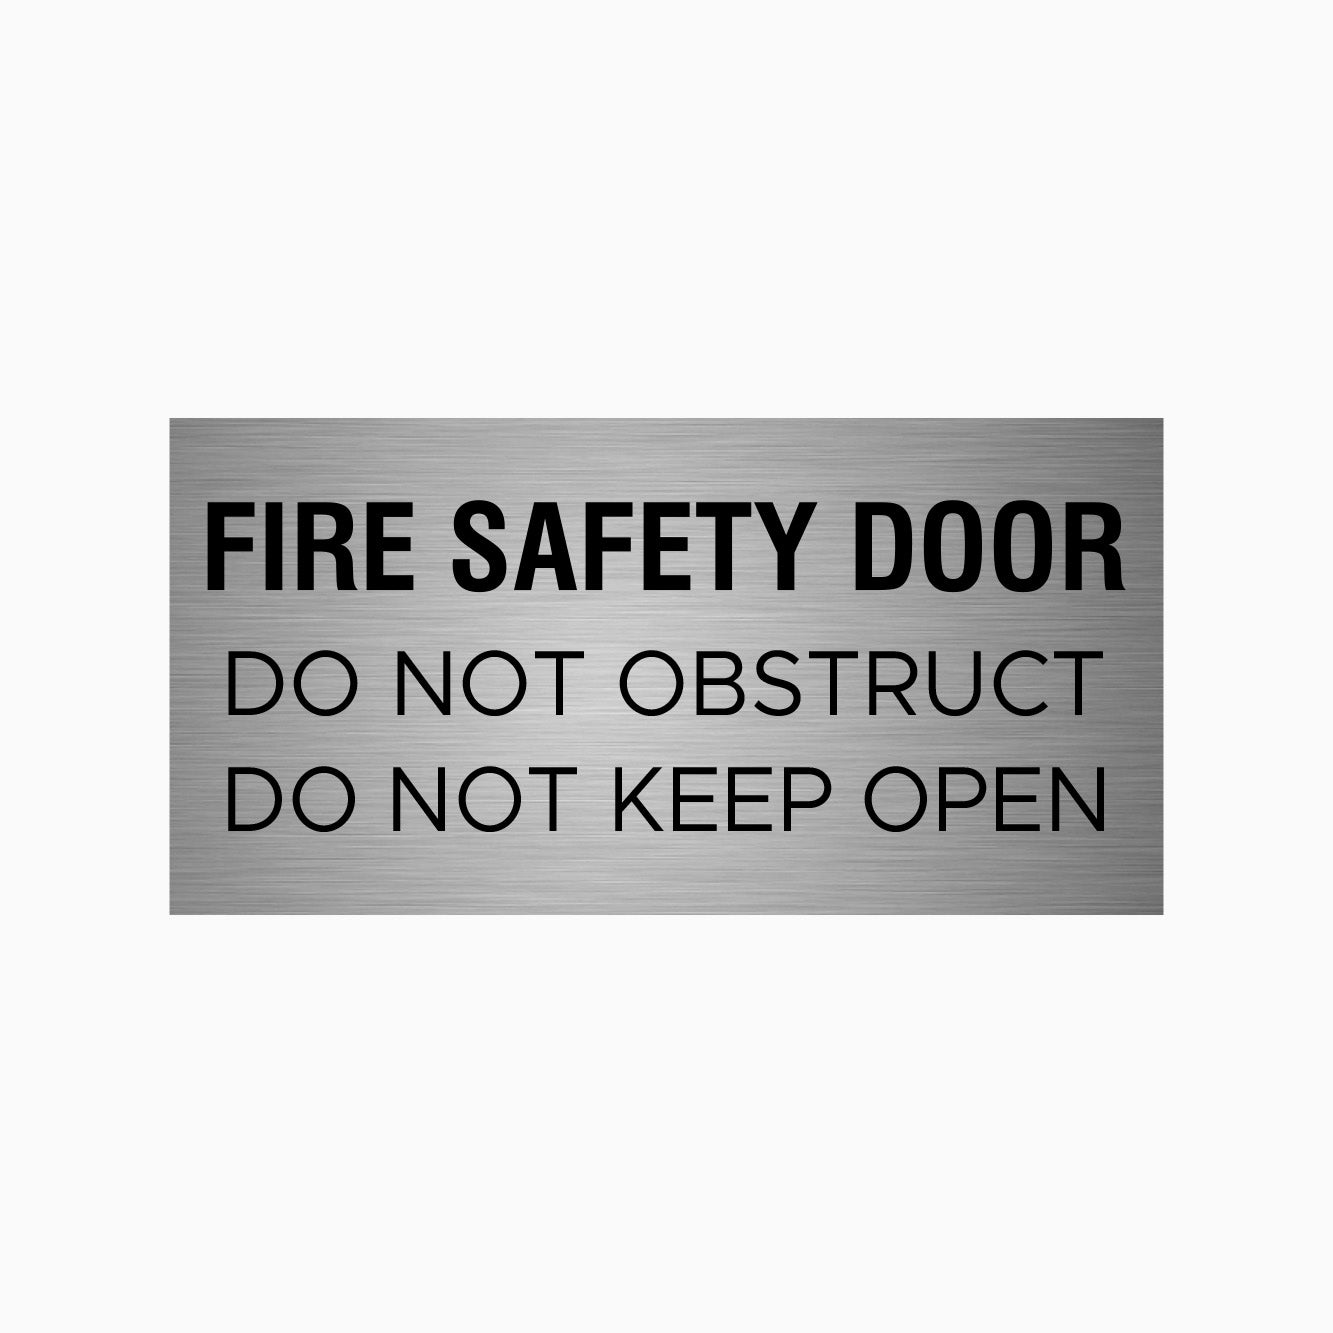 FIRE SAFETY DOOR SIGN - DO NOT OBSTRUCT - DO NOT KEEP OPEN SIGN  - GET SIGNS 